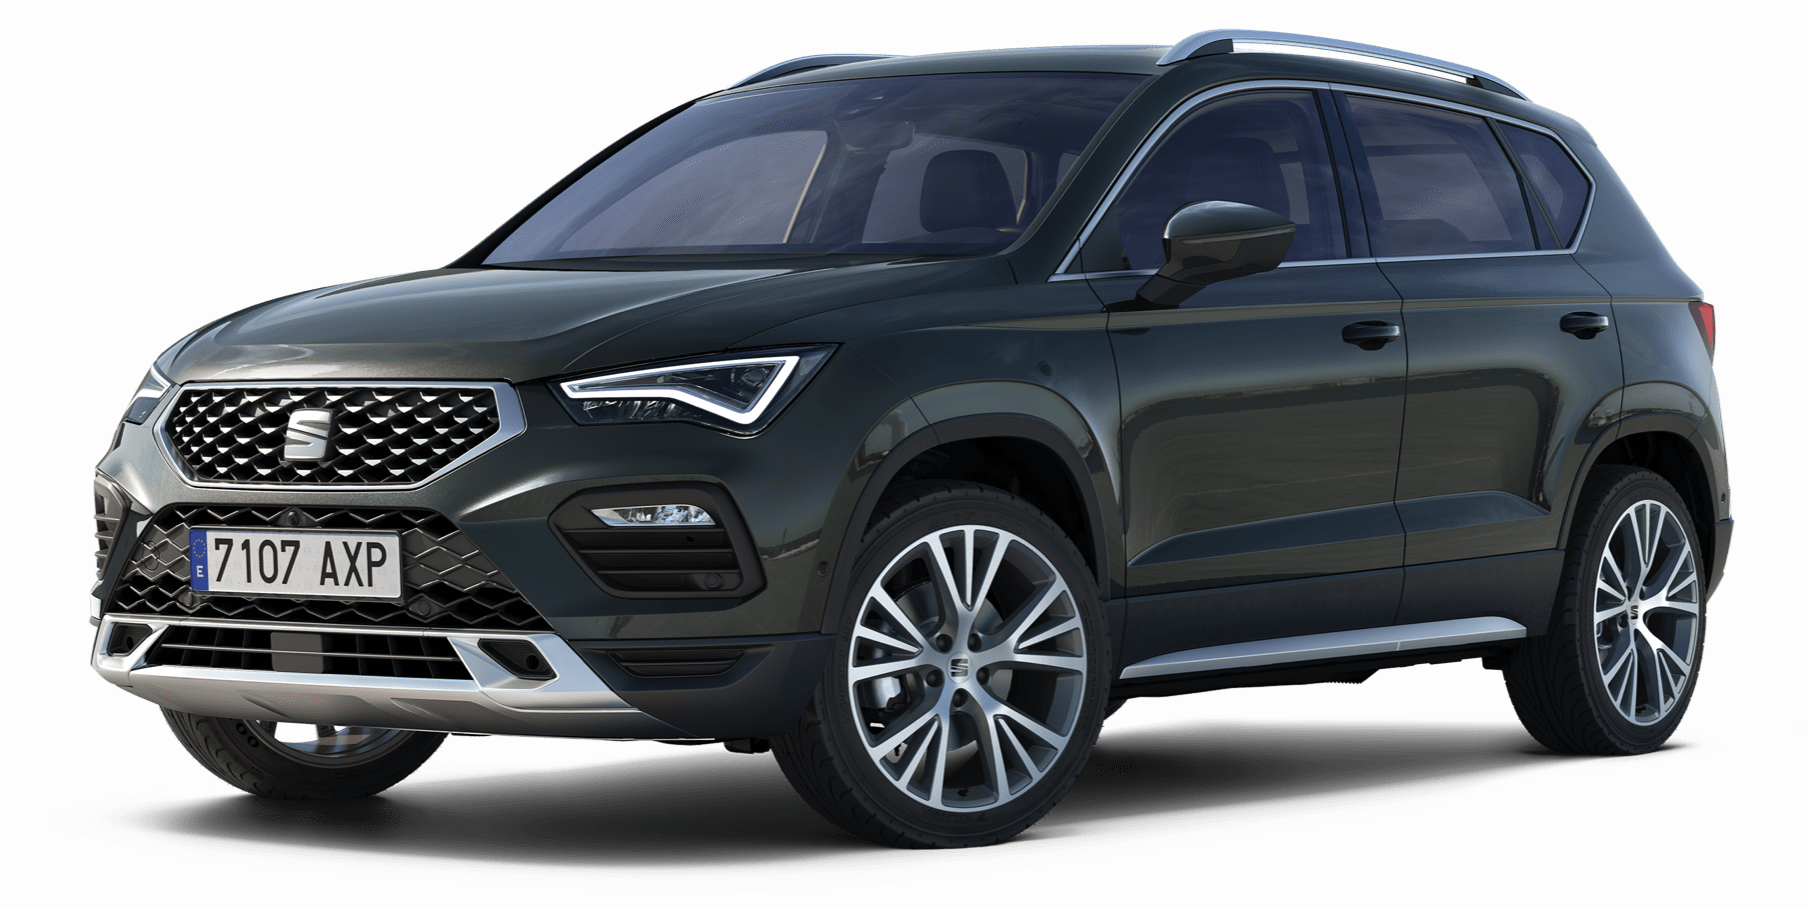 https://www.seat.com/content/dam/public/seat-website/carworlds/new-ateca-2021/ateca-xperience/header-version-new-ateca/seat-ateca-xperience-trim-dark-camouflage-colour.png